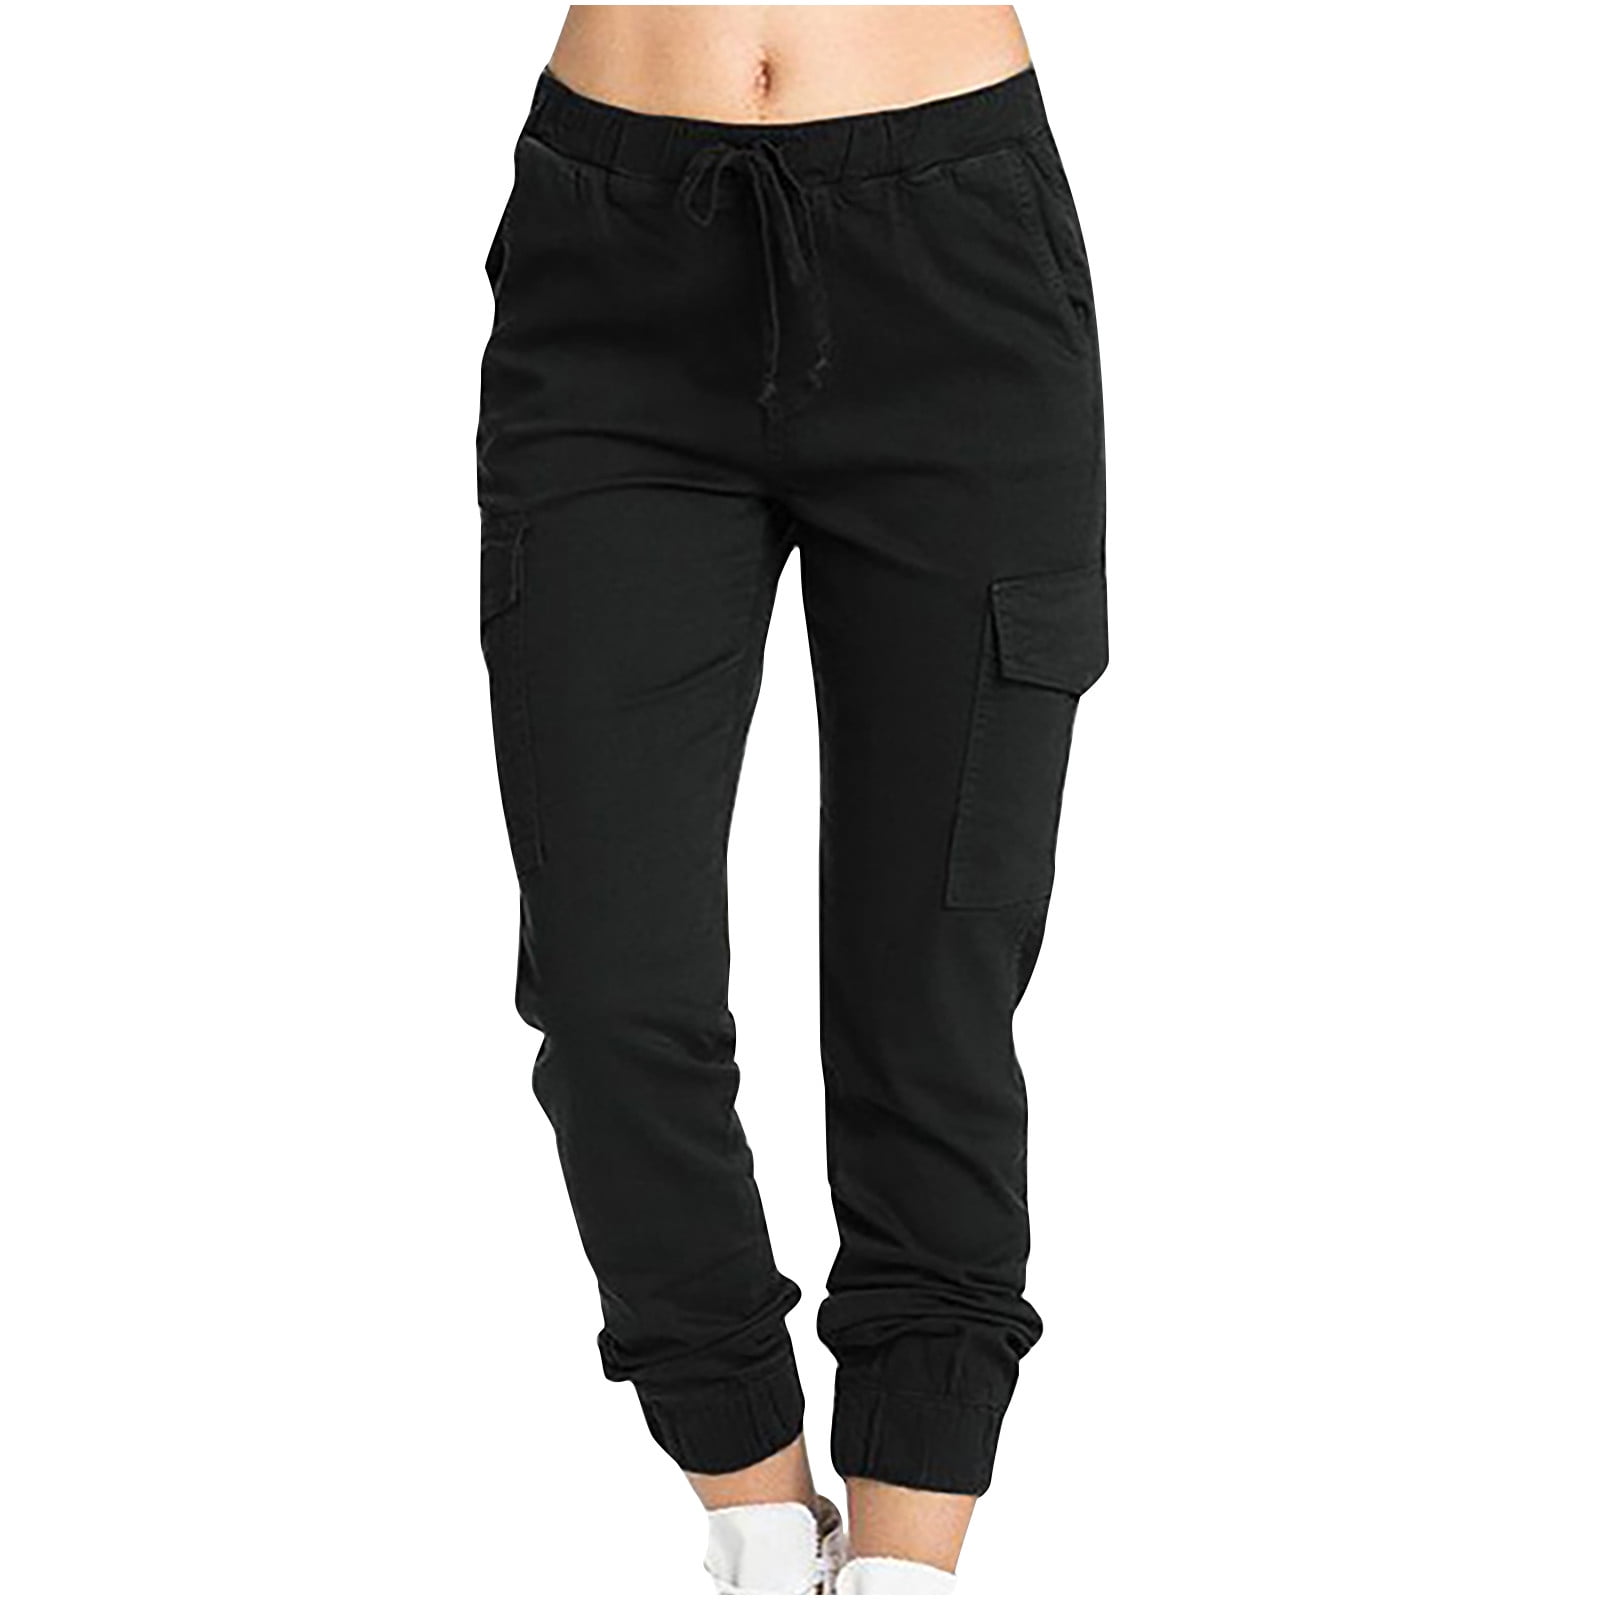  SPECIALMAGIC Sweat Shorts for Women Cotton Shorts with Pockets  Running Sweatpants Lounge Sweat Joggers Black S : Clothing, Shoes & Jewelry